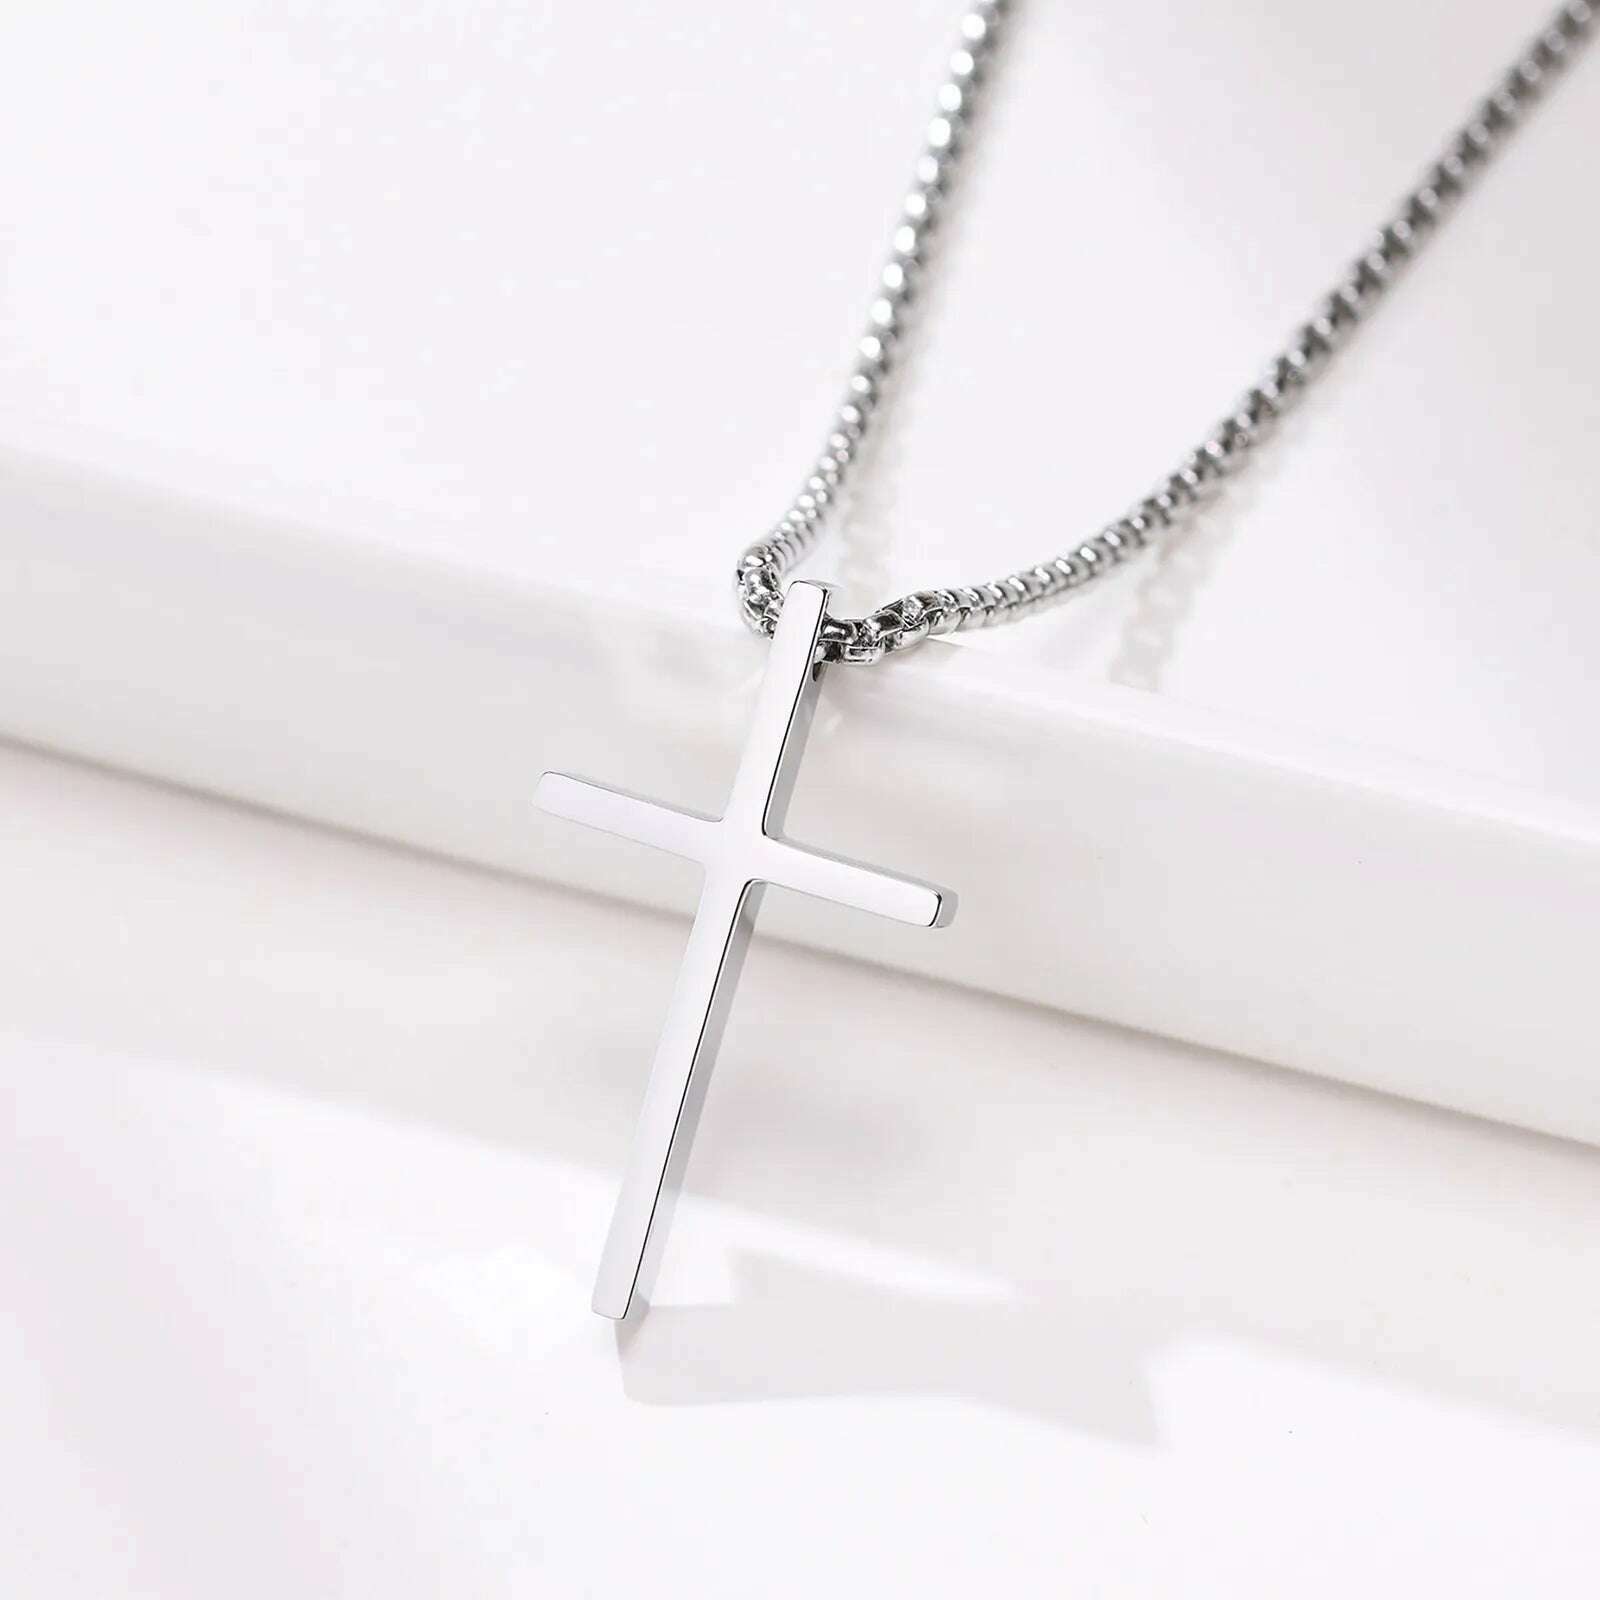 KIMLUD, Vnox Mens Cross Necklaces, Stainless Steel Layered Plain Cross Pendant, Rope Box Chain Necklace, Simple Prayer Jesus Collar, NC-1035S, KIMLUD Women's Clothes